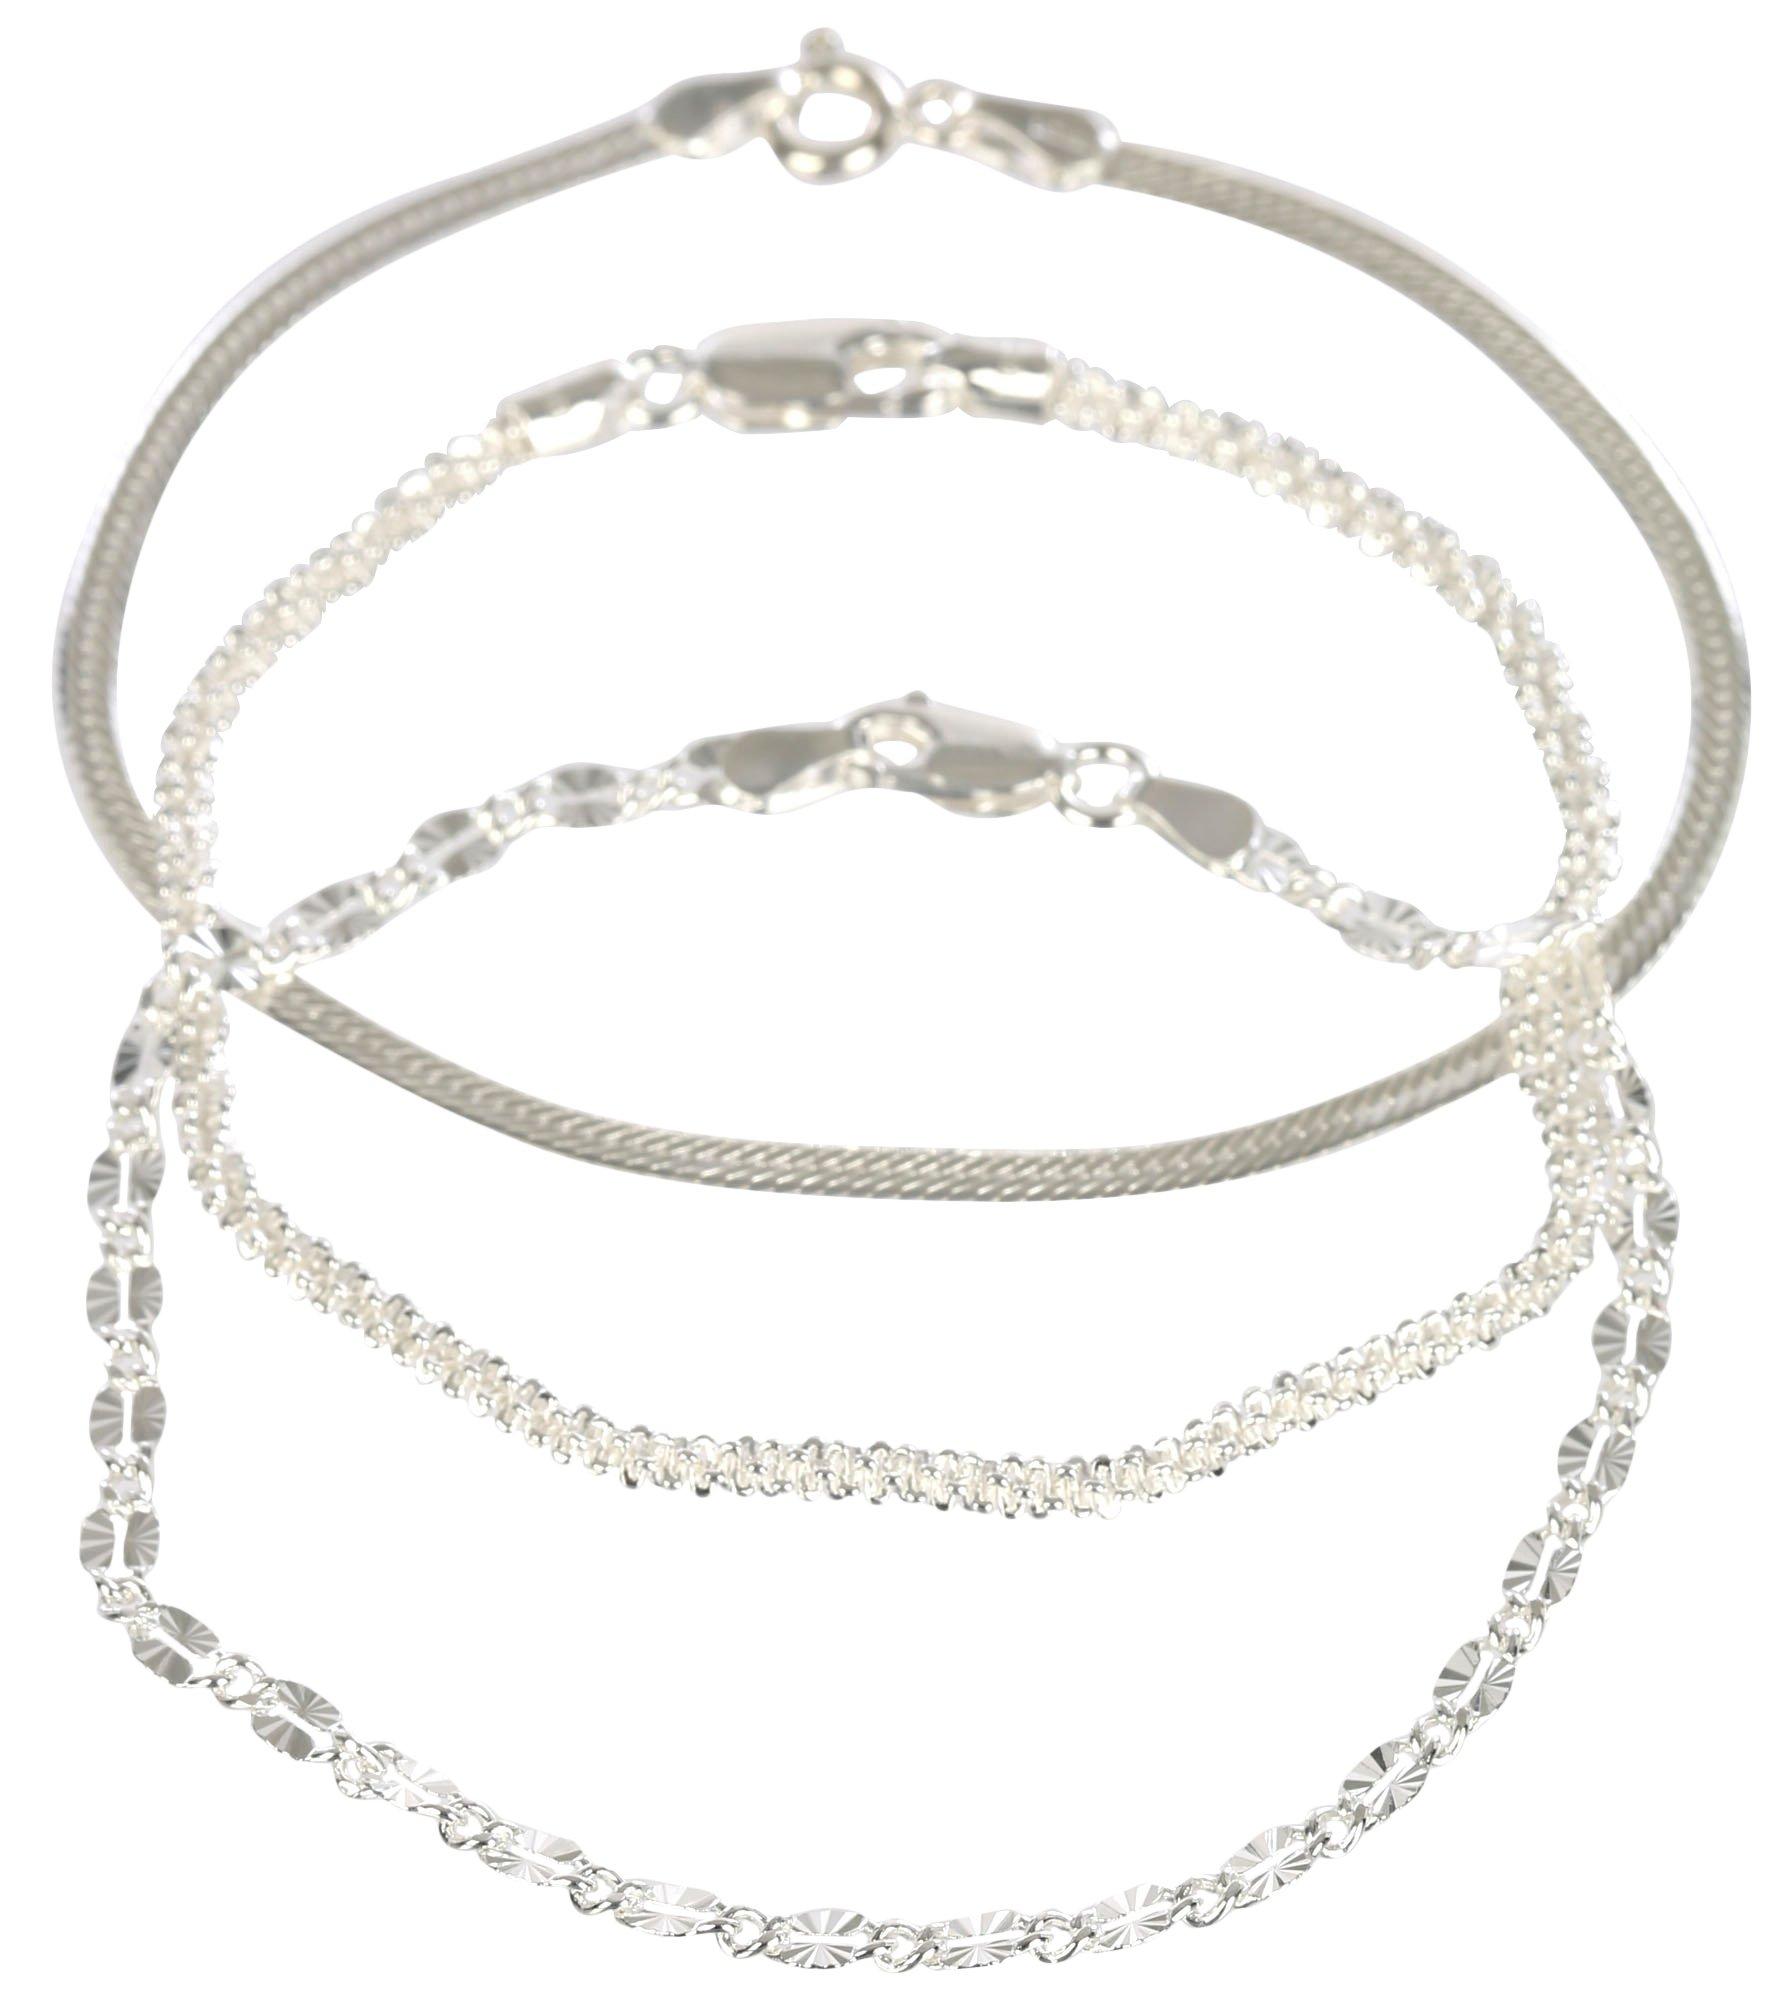 Piper & Taylor 3-Pc. 7 In. Flat Textured Chain Bracelet Set